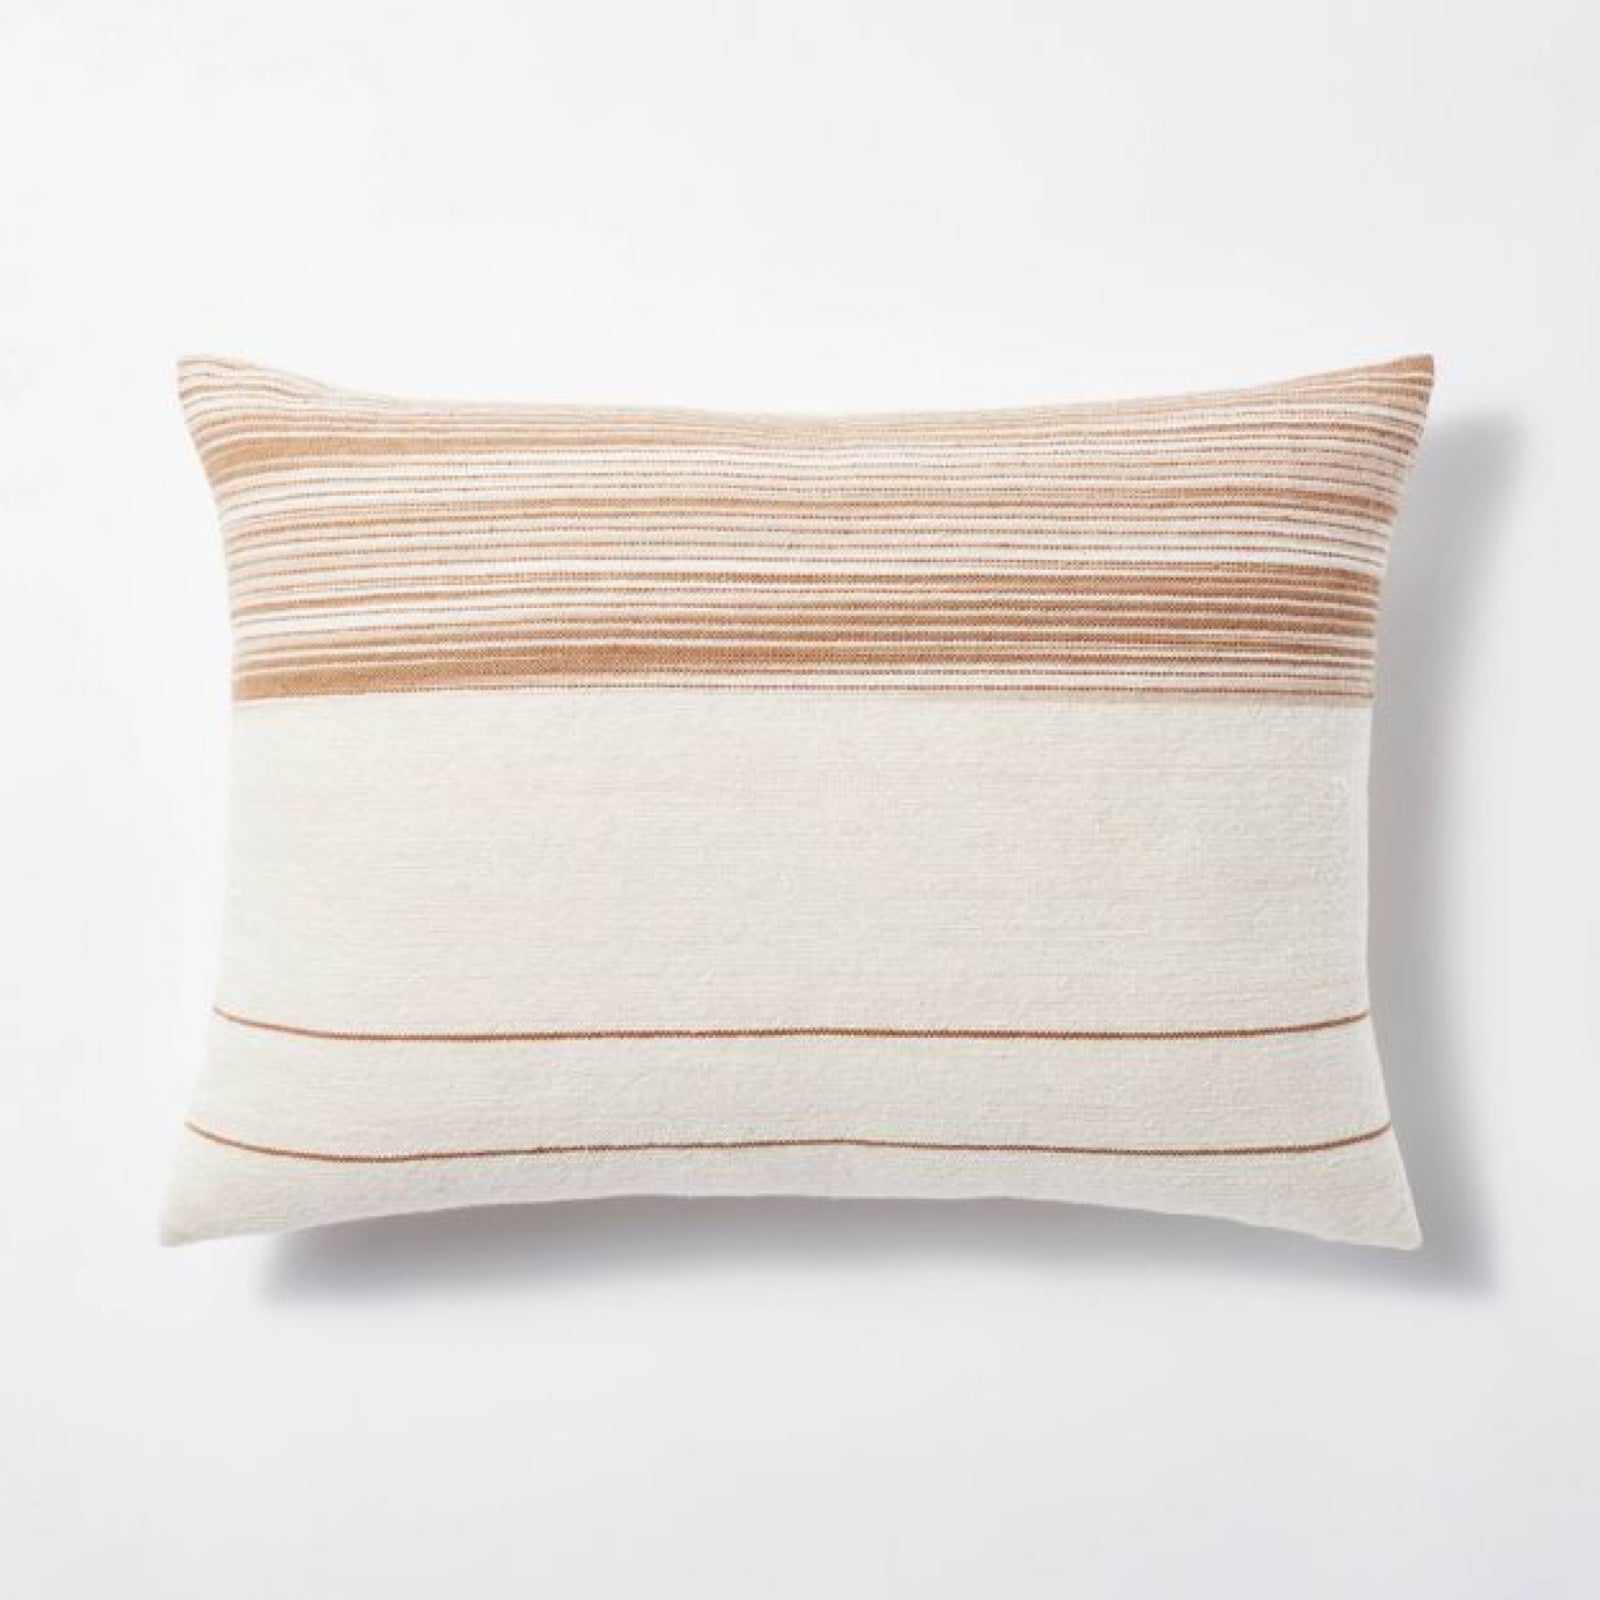 Stripped decorative Pillow